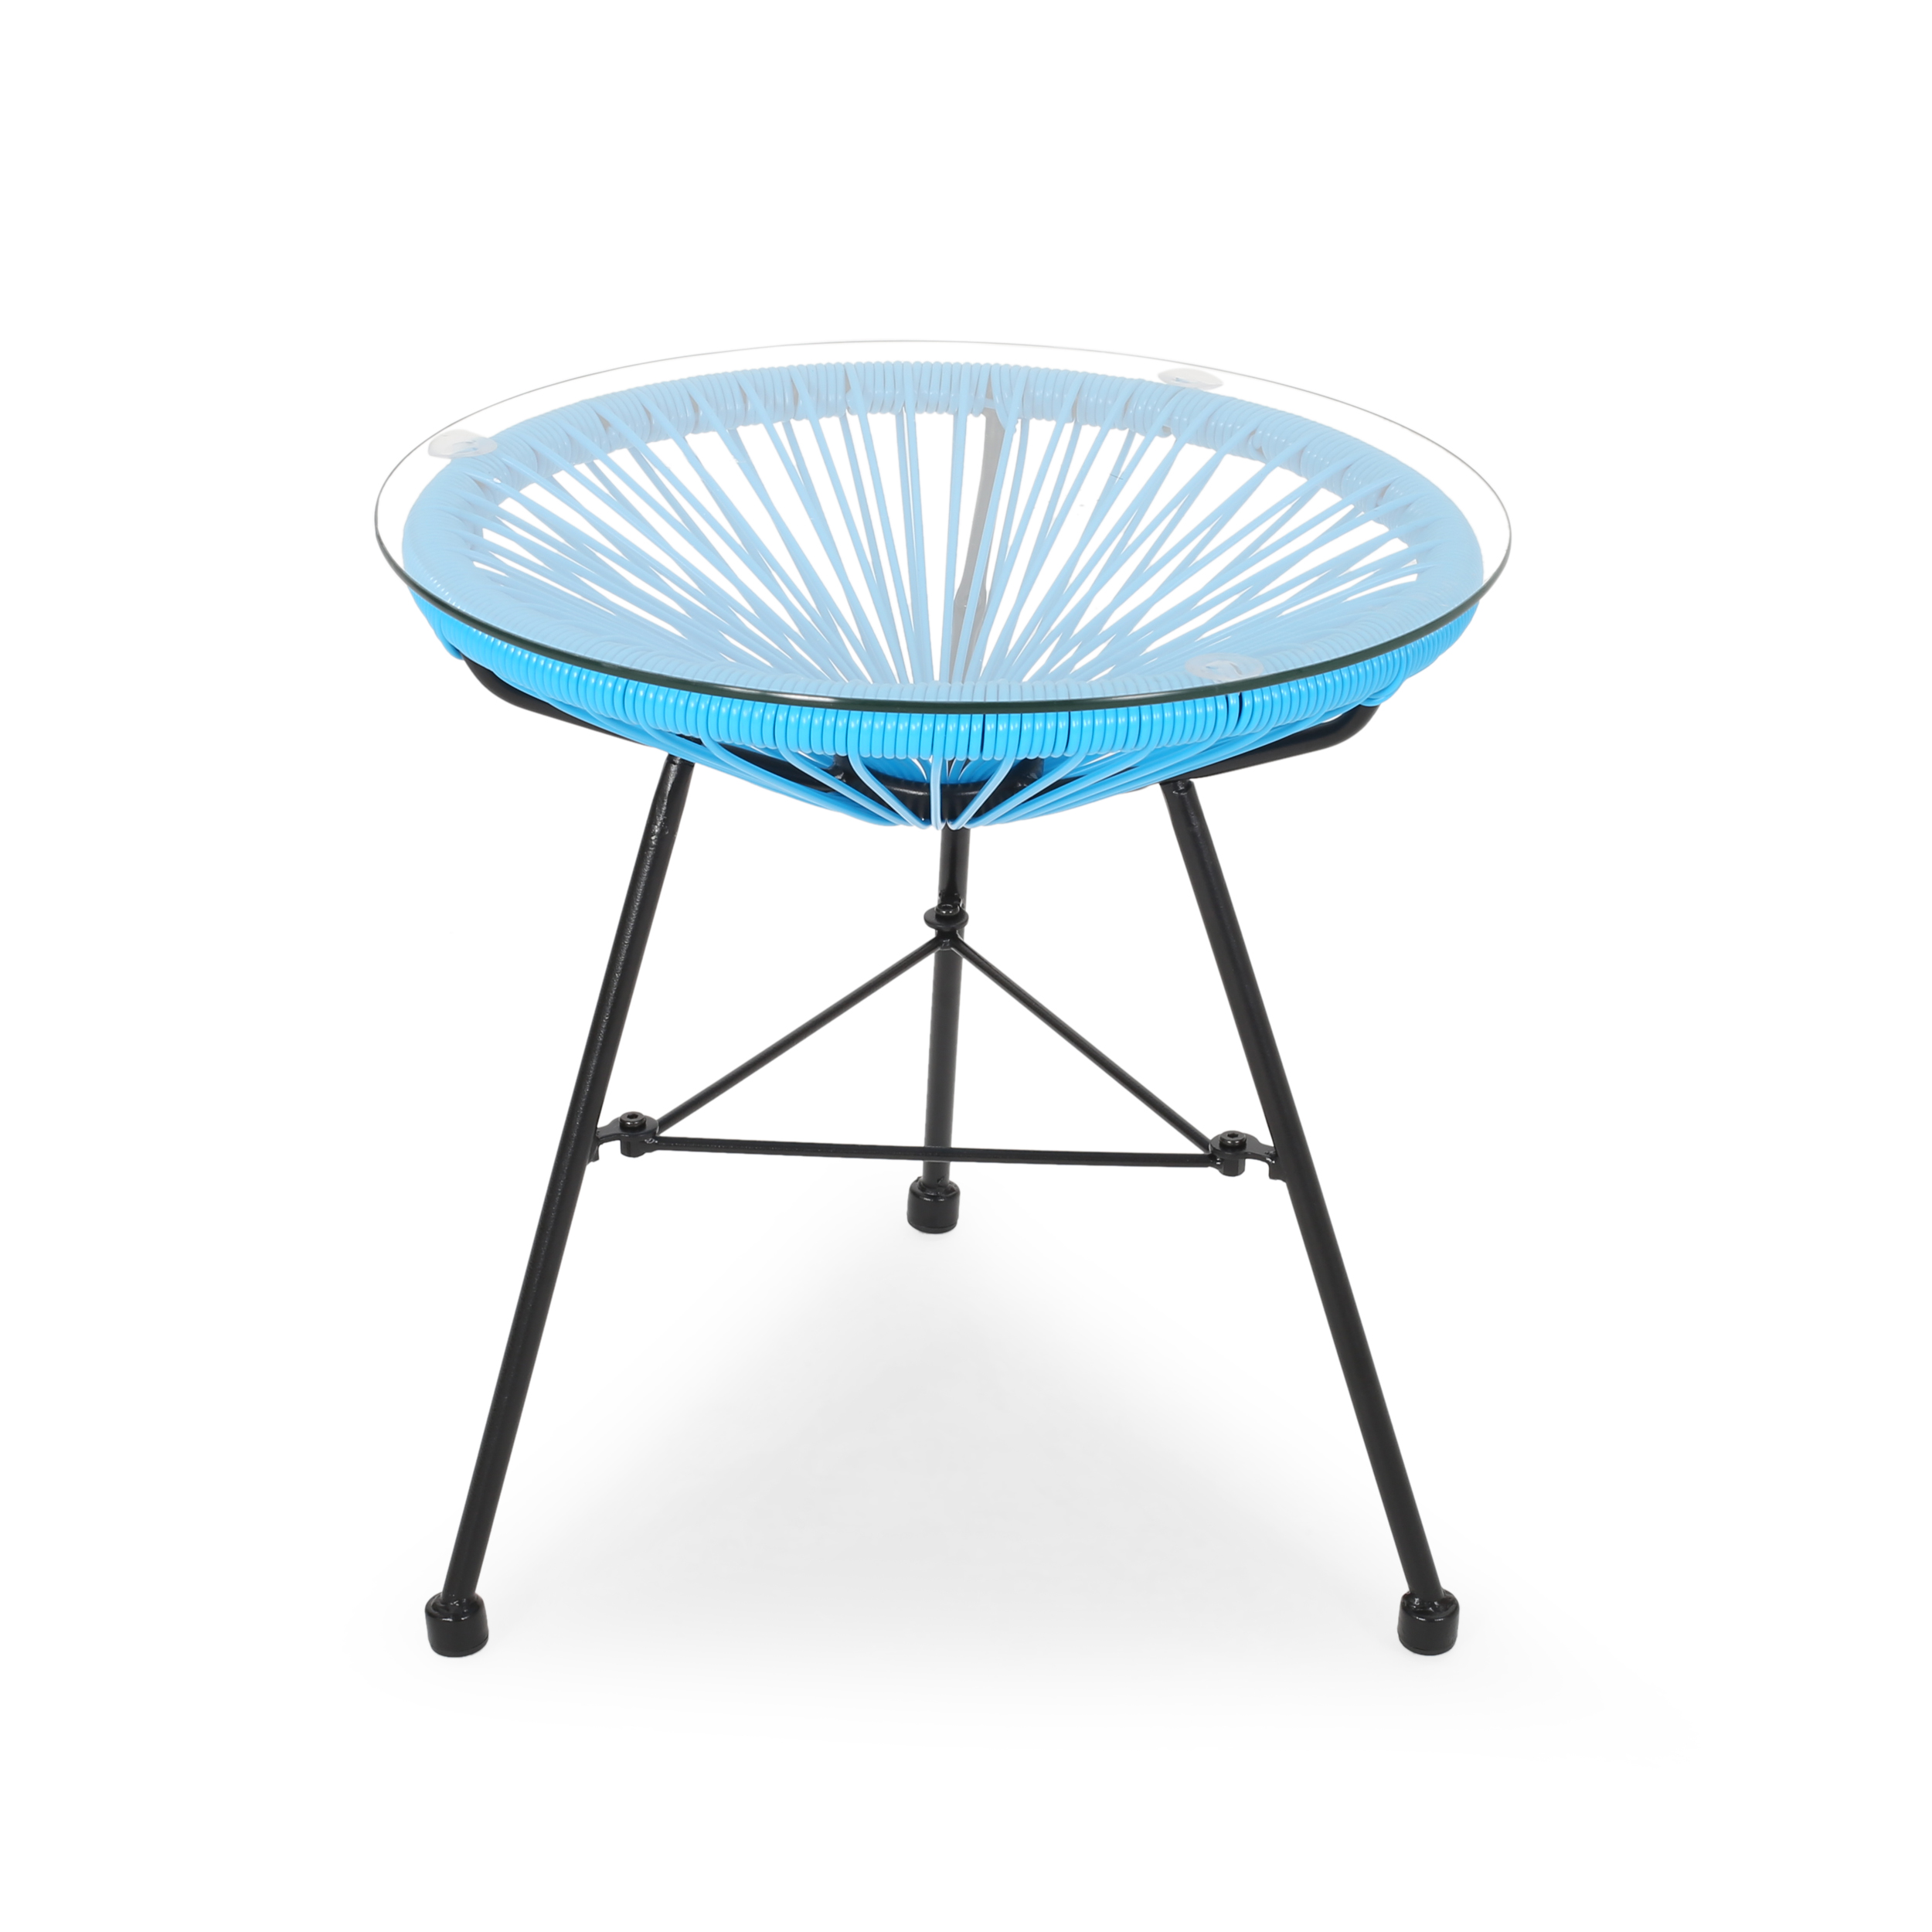 GDF Studio Chrissy Outdoor Modern Faux Rattan Side Table with Tempered Glass Top, Blue and Black - image 4 of 9